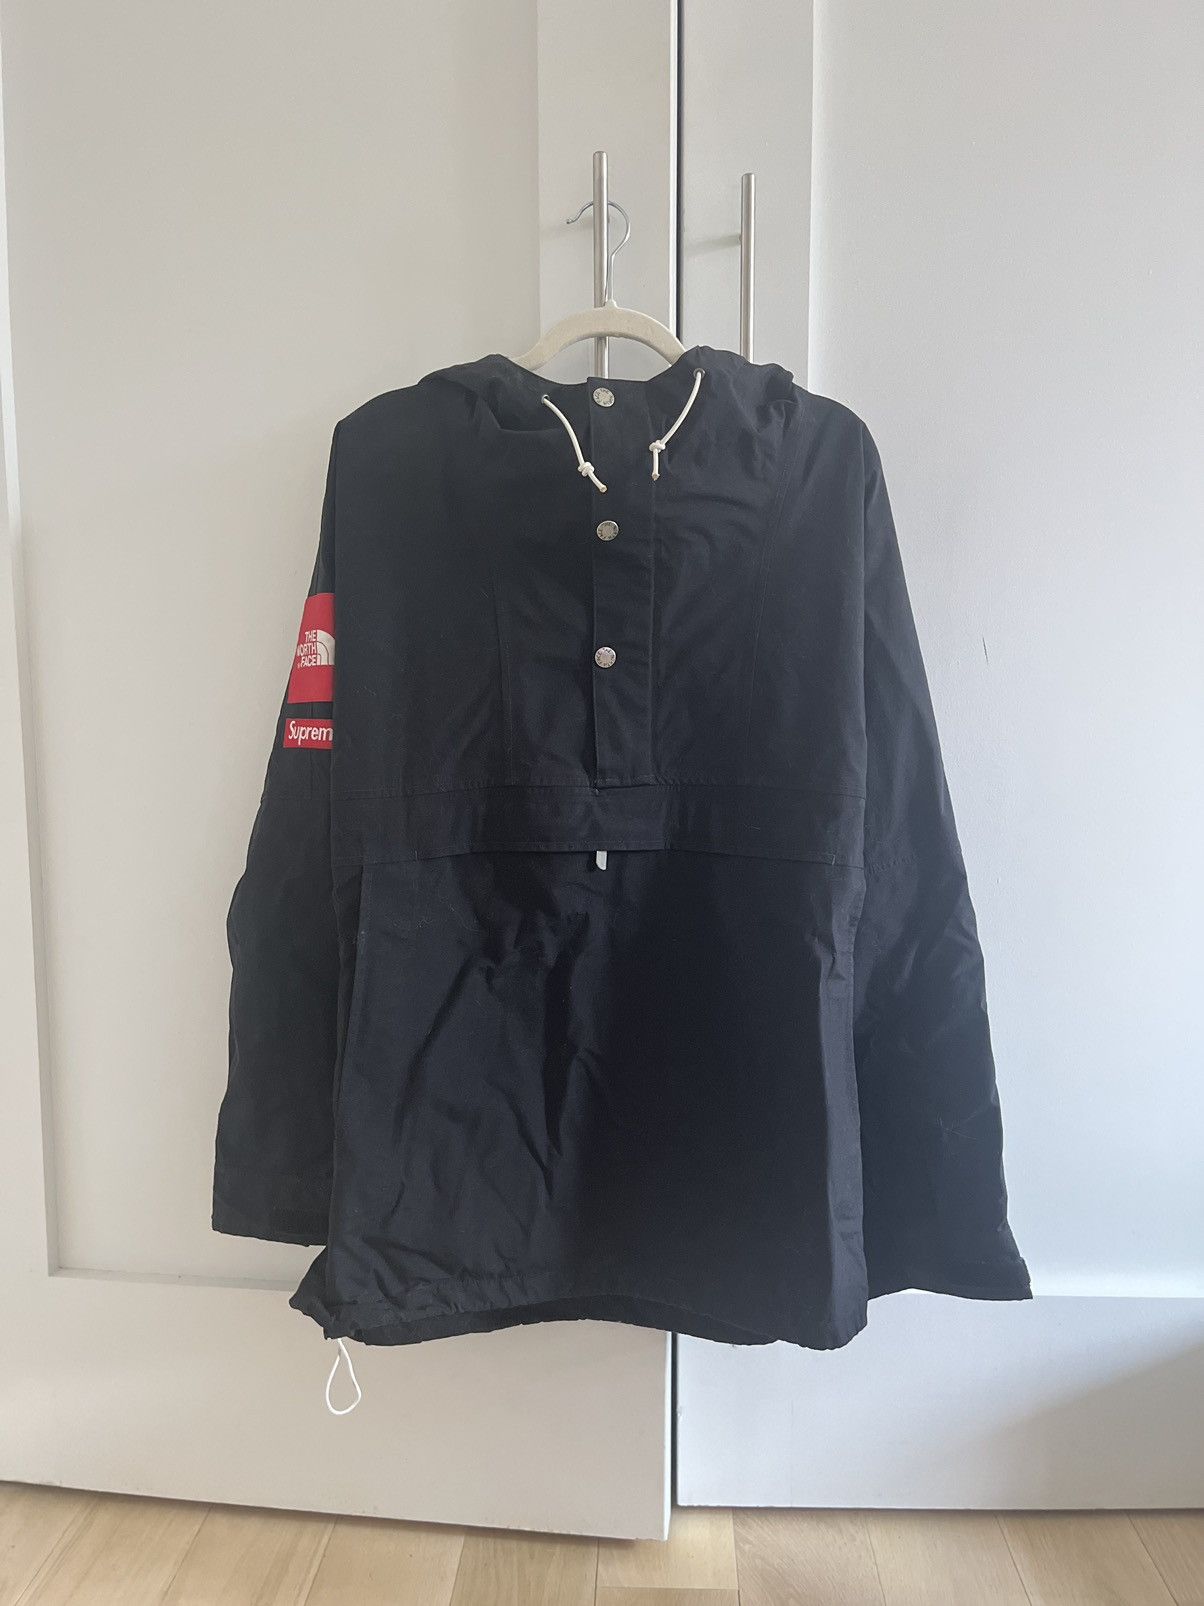 Supreme Supreme x The North Face Expedition Jacket 2010 | Grailed